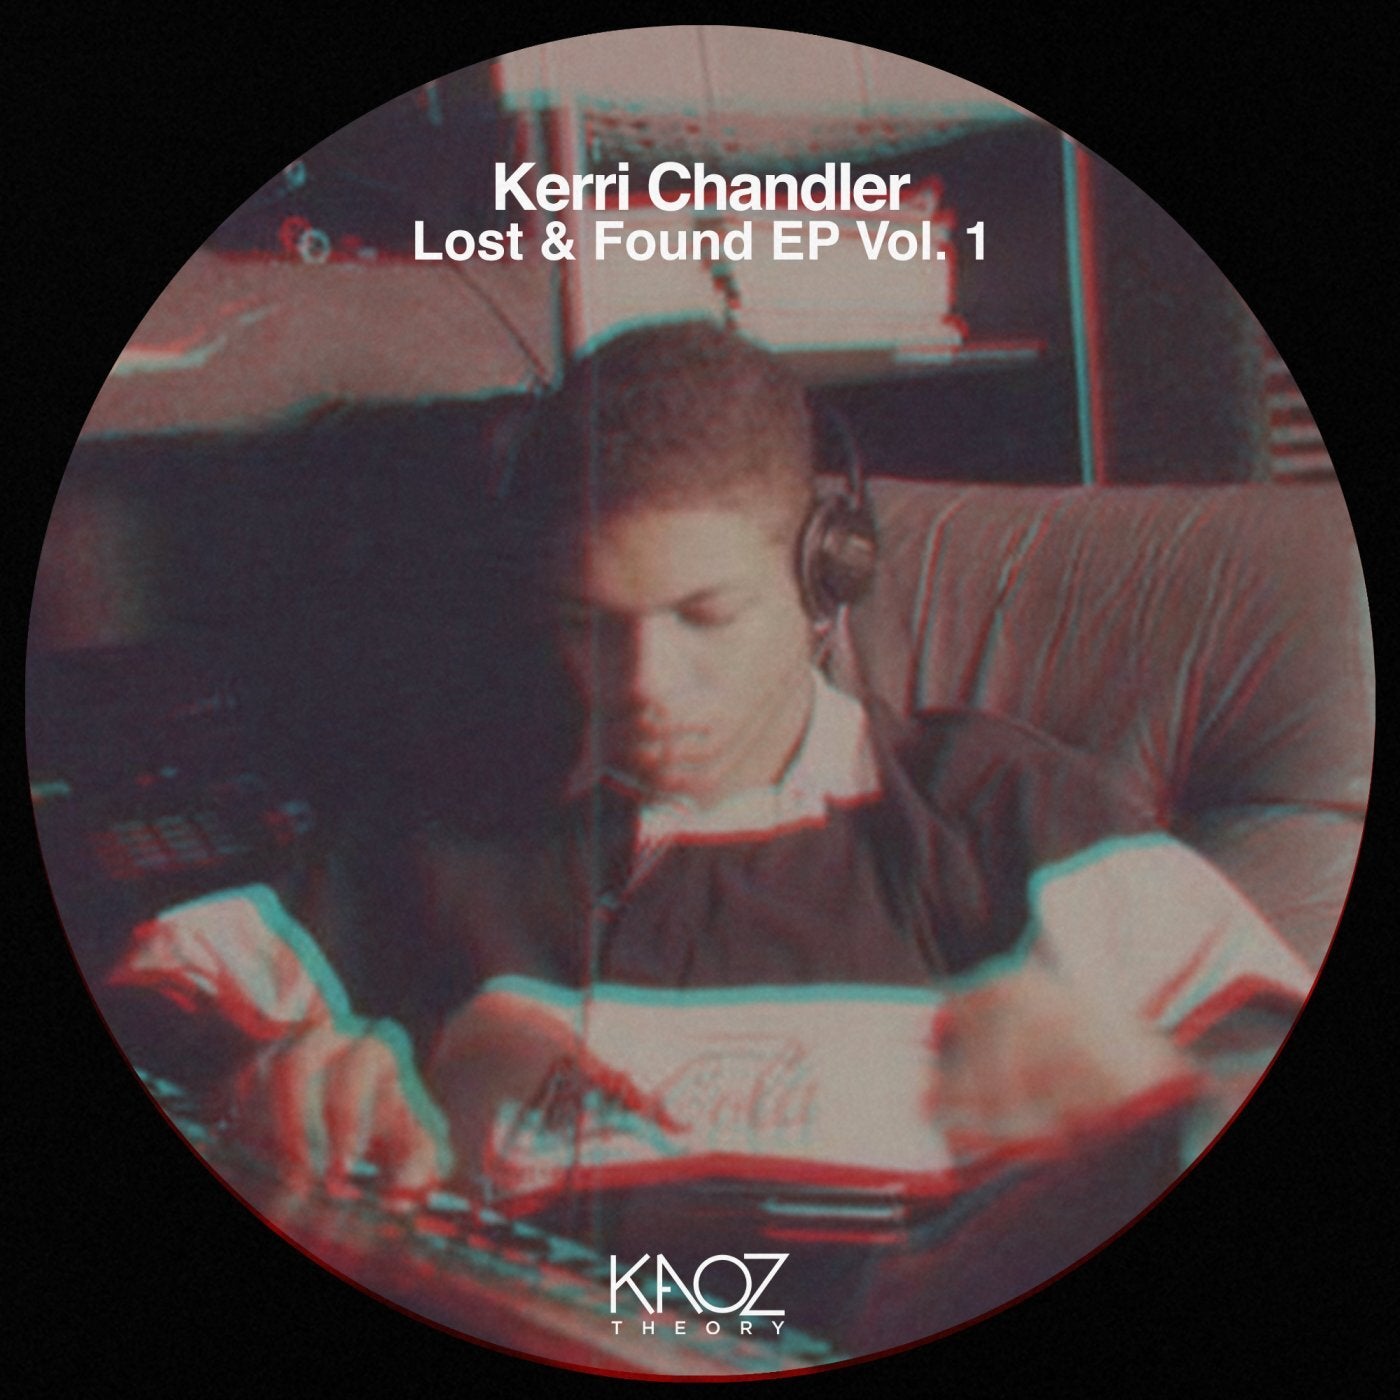 Lost & Found EP Vol. 1 from Kaoz Theory on Beatport